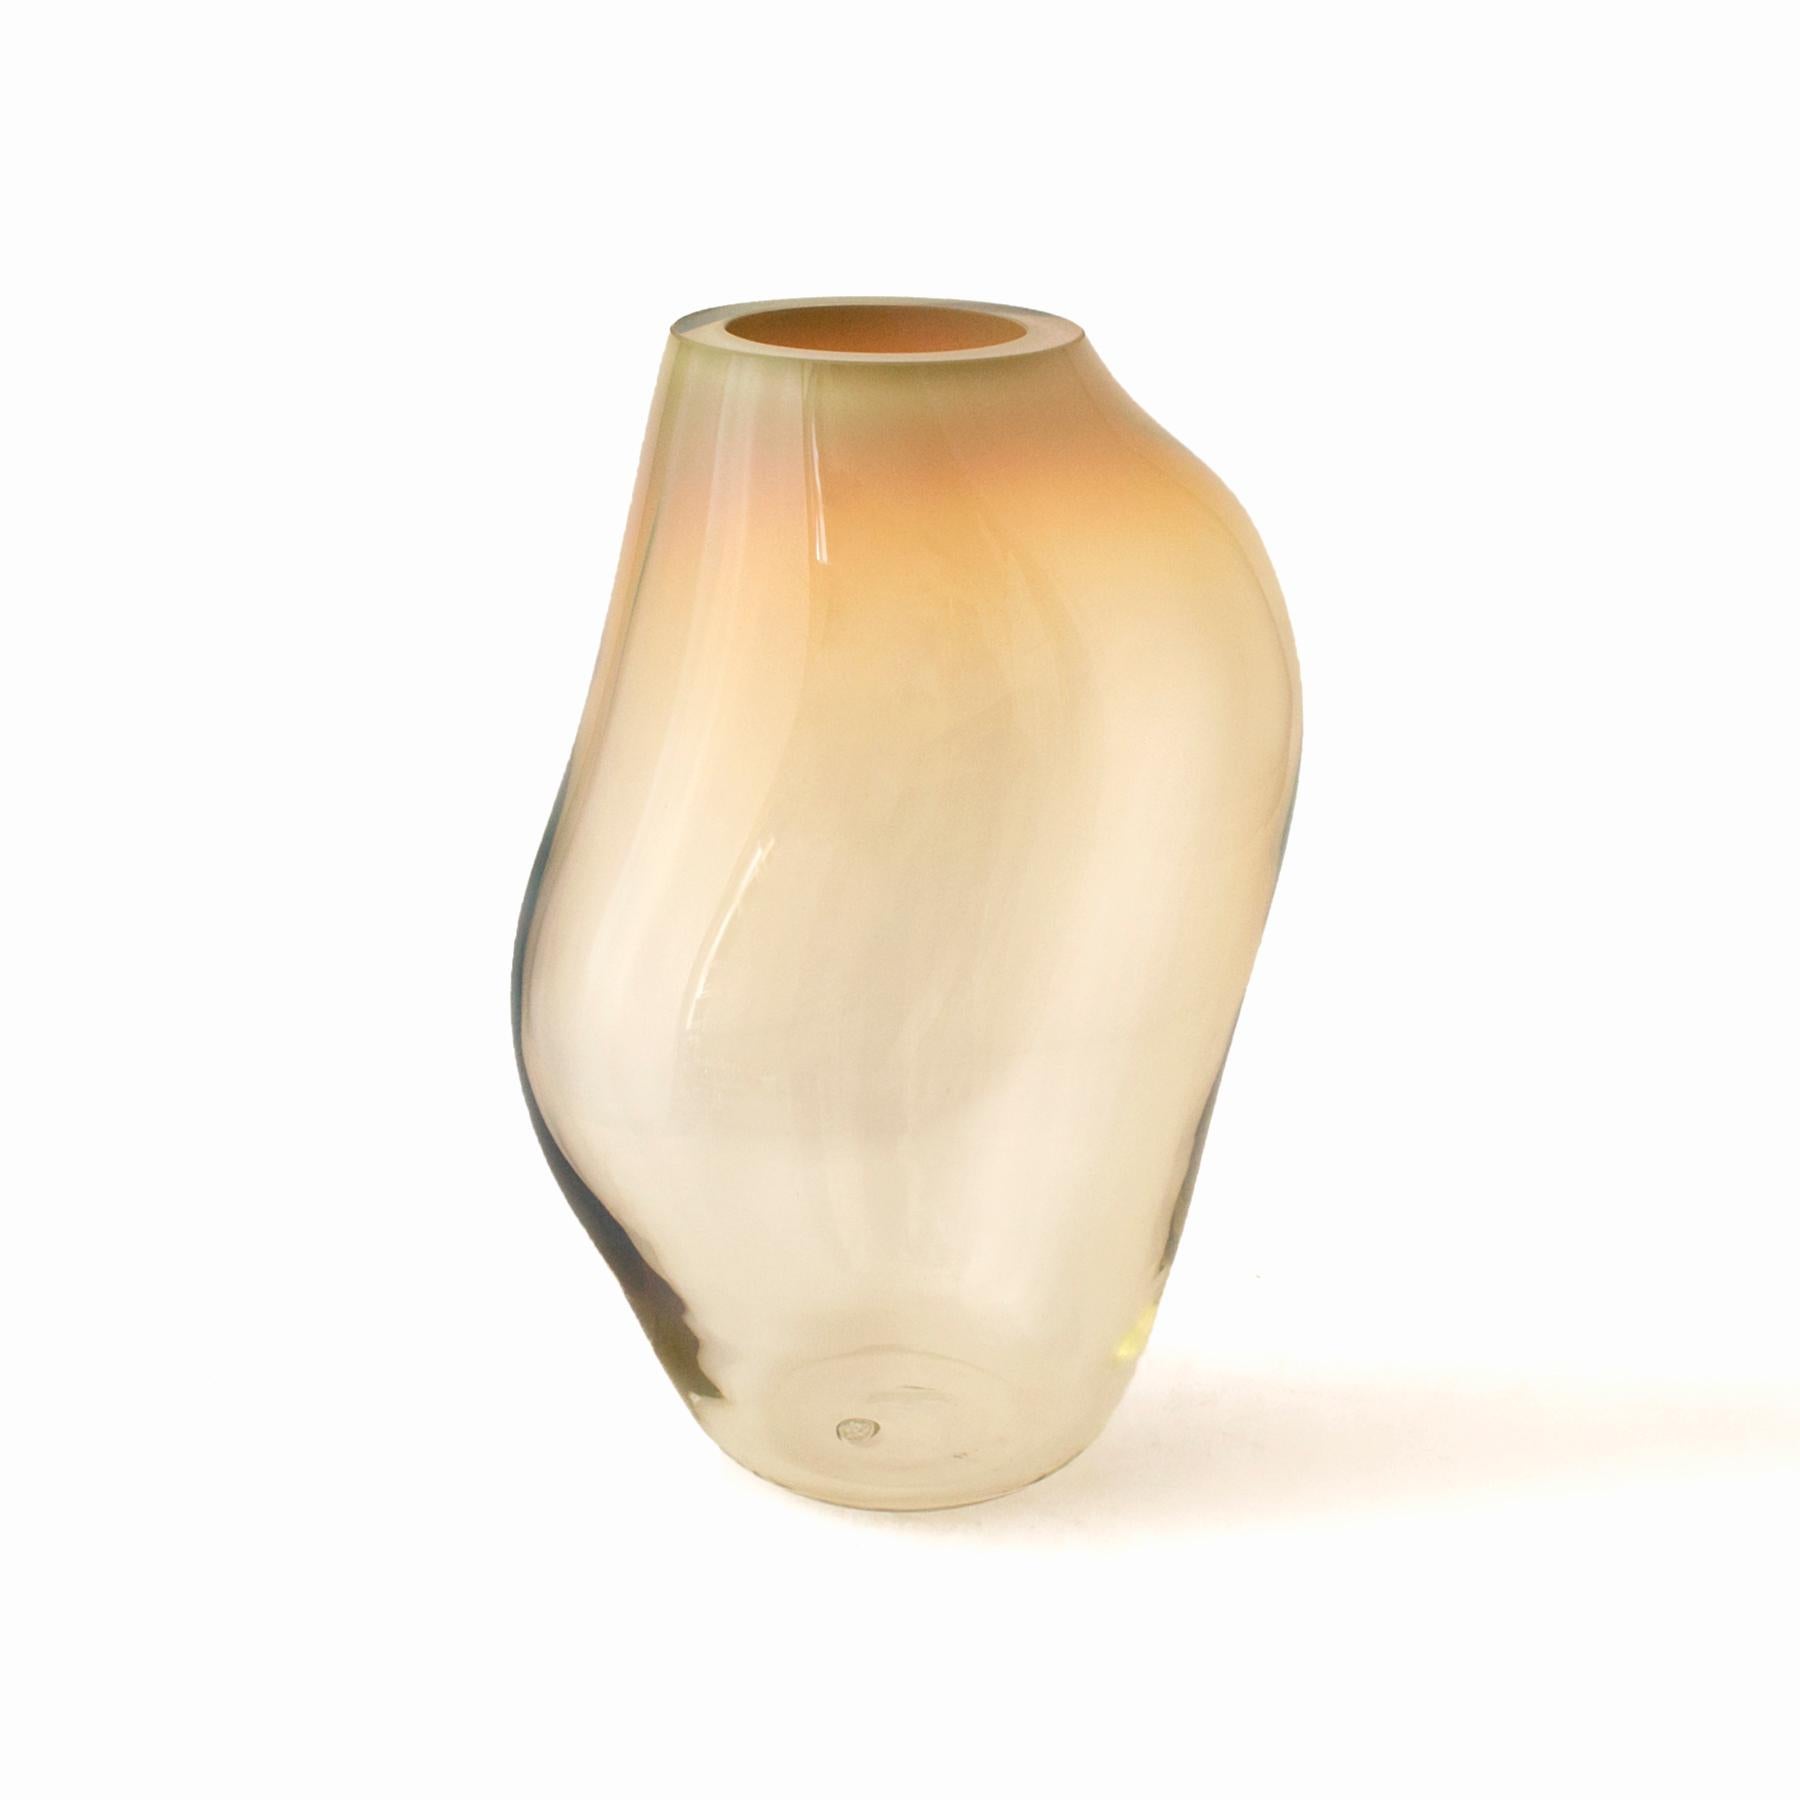 Supernova IV amber iridescent m vase by ELOA.
No UL listed 
Material: glass
Dimensions: D 15 x W 17 x H 36 cm
Also available in different colours and dimensions.

Supernova is a collection of vases and bowls that, though they don‘t shine
themselves,